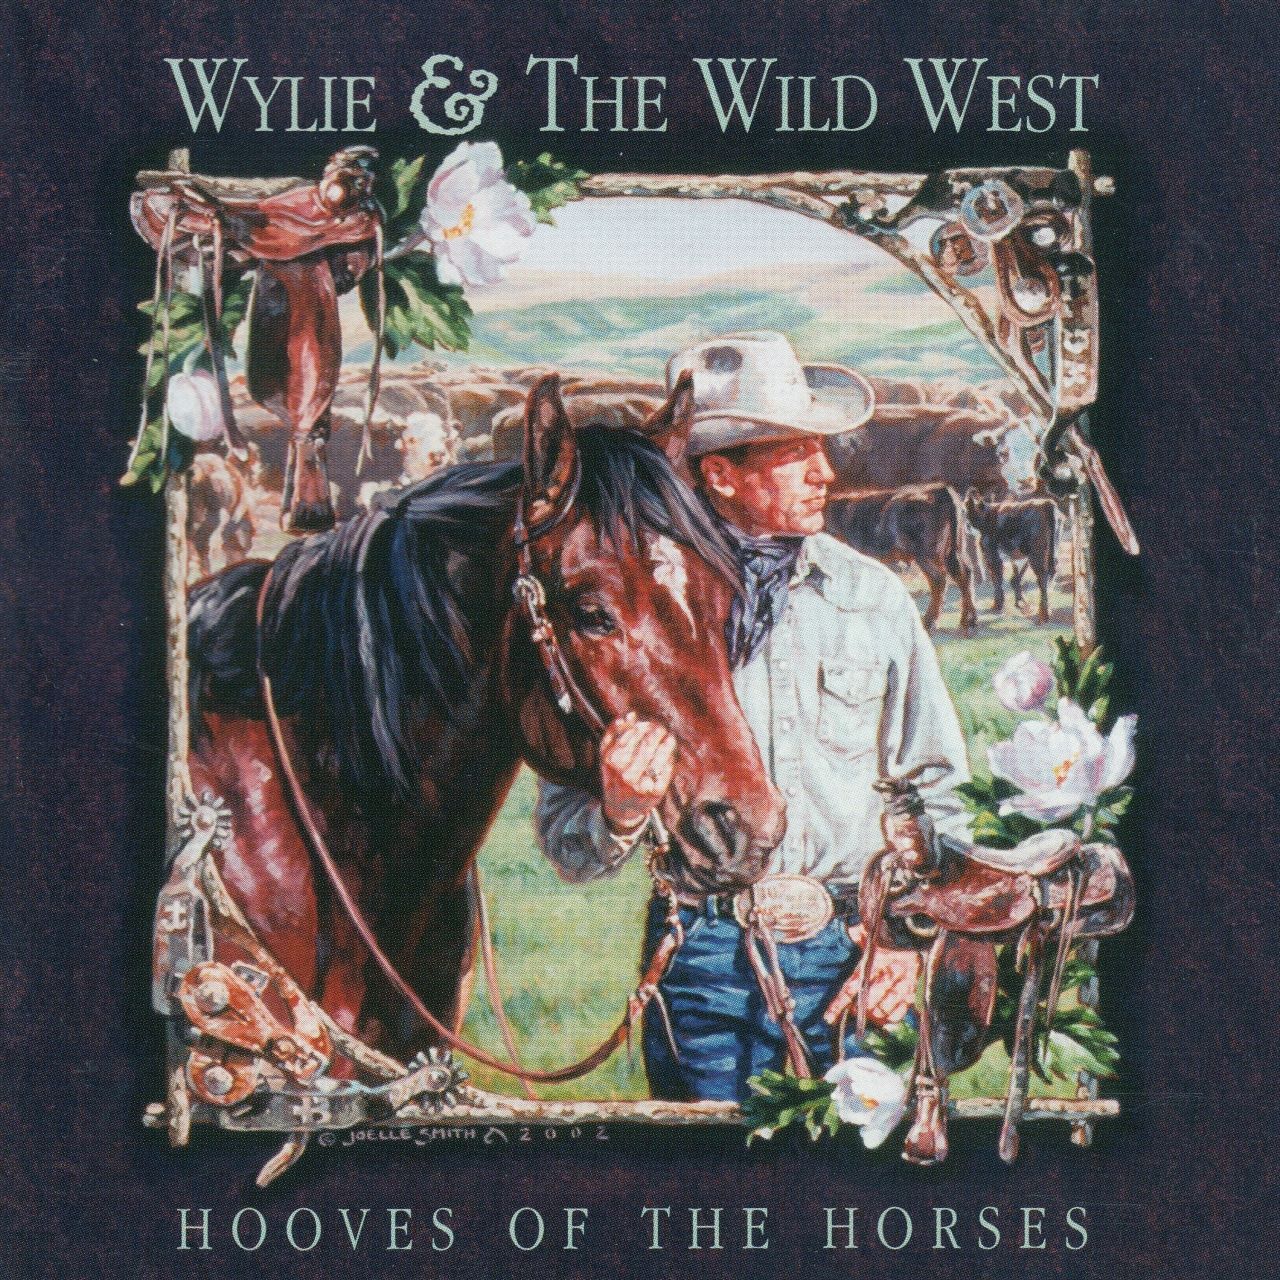 Wylie & The Wild West - Hooves Of The Horses cover album